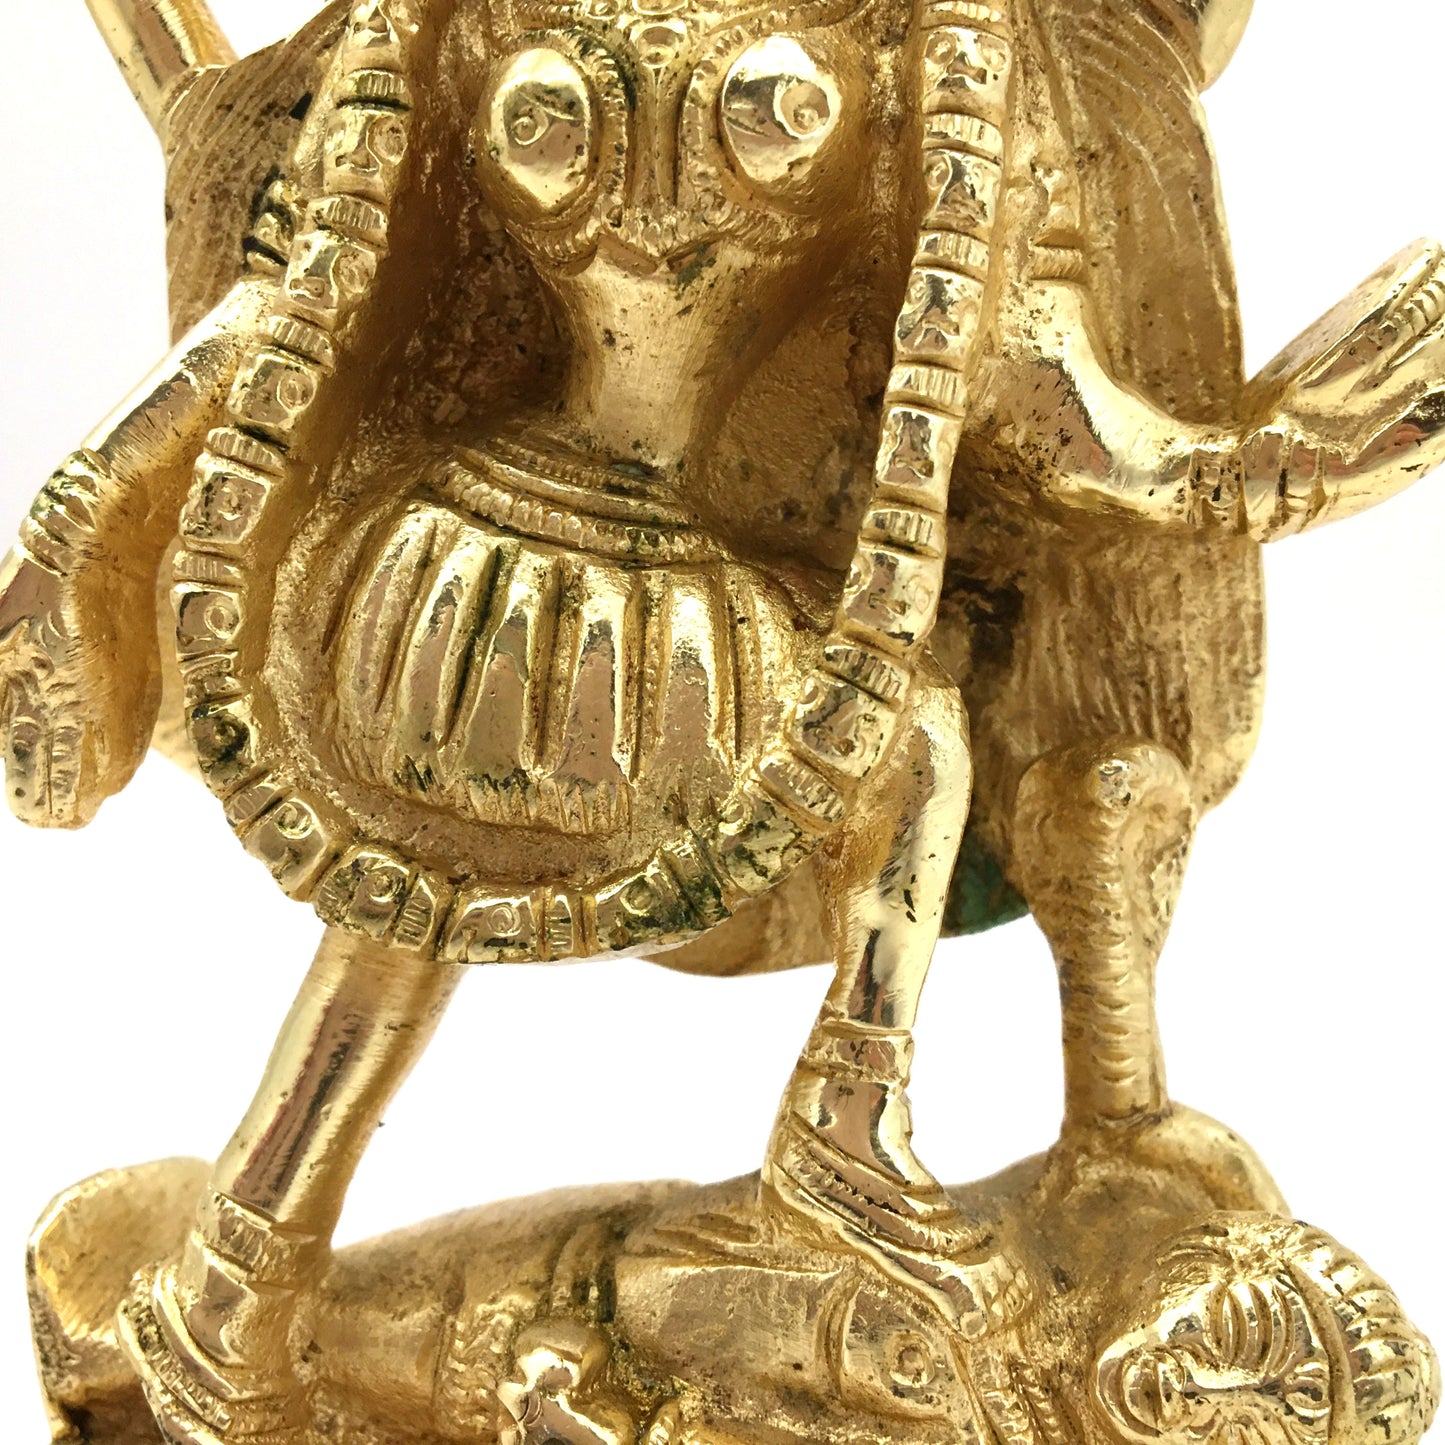 Gold-Plated India Goddess Kali Mata Divine Mother Statue Idol 5.75” -Handcrafted